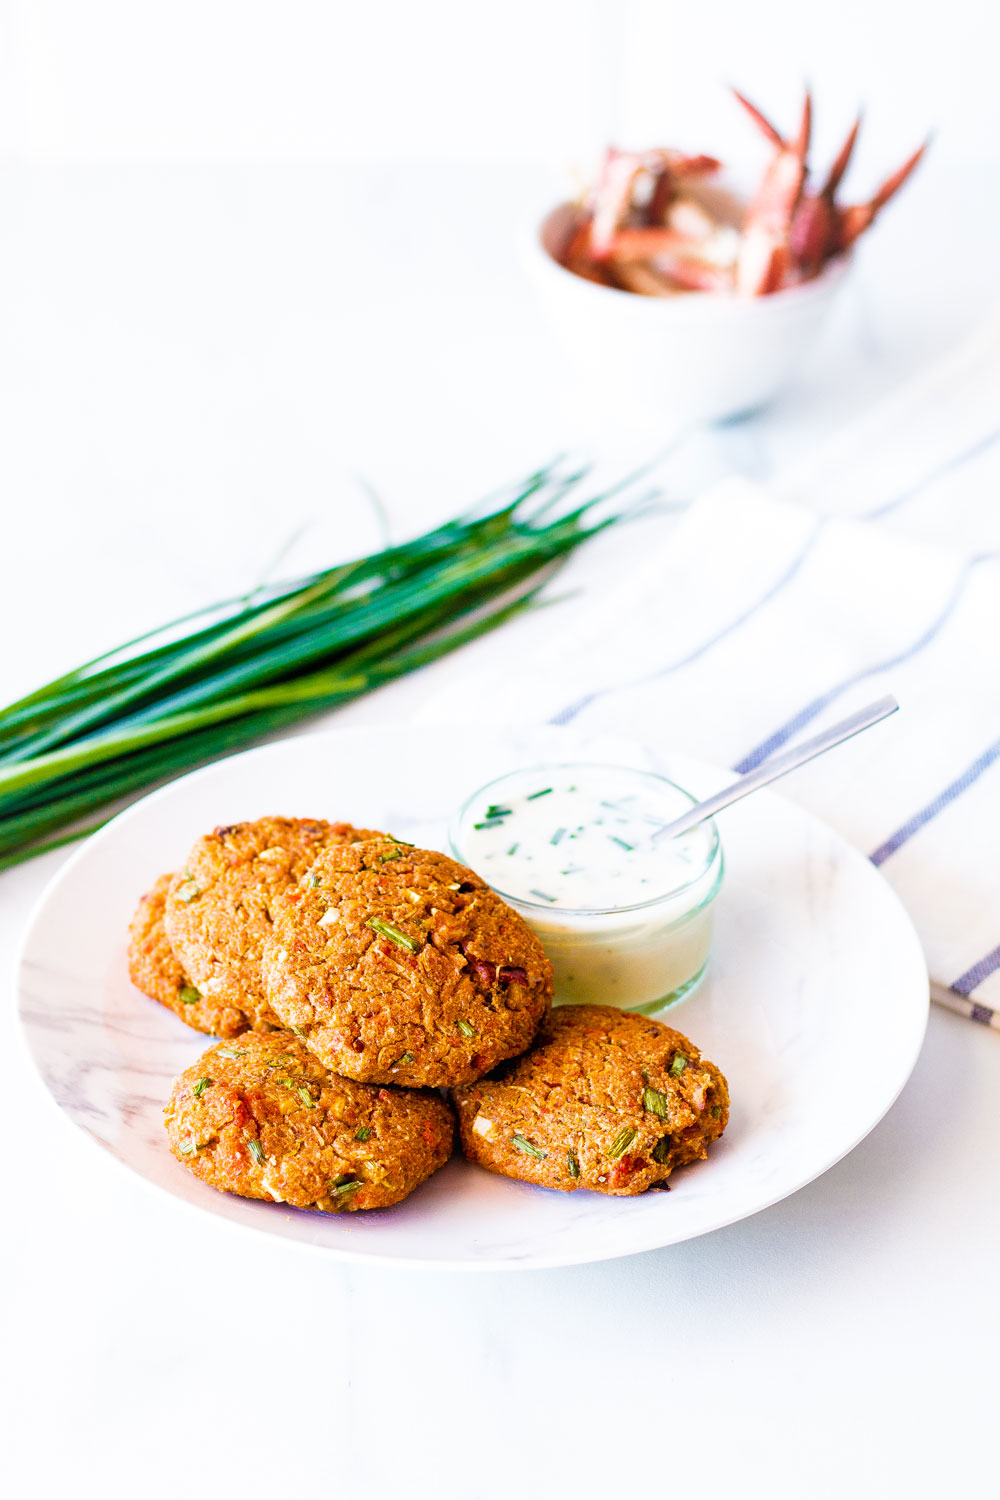 These Light & Simple Baked Crab Cakes are made with simple, wholesome ingredients, are low in fat, and each cake only contains around 50 calories. https://www.spotebi.com/recipes/light-simple-baked-crab-cakes/